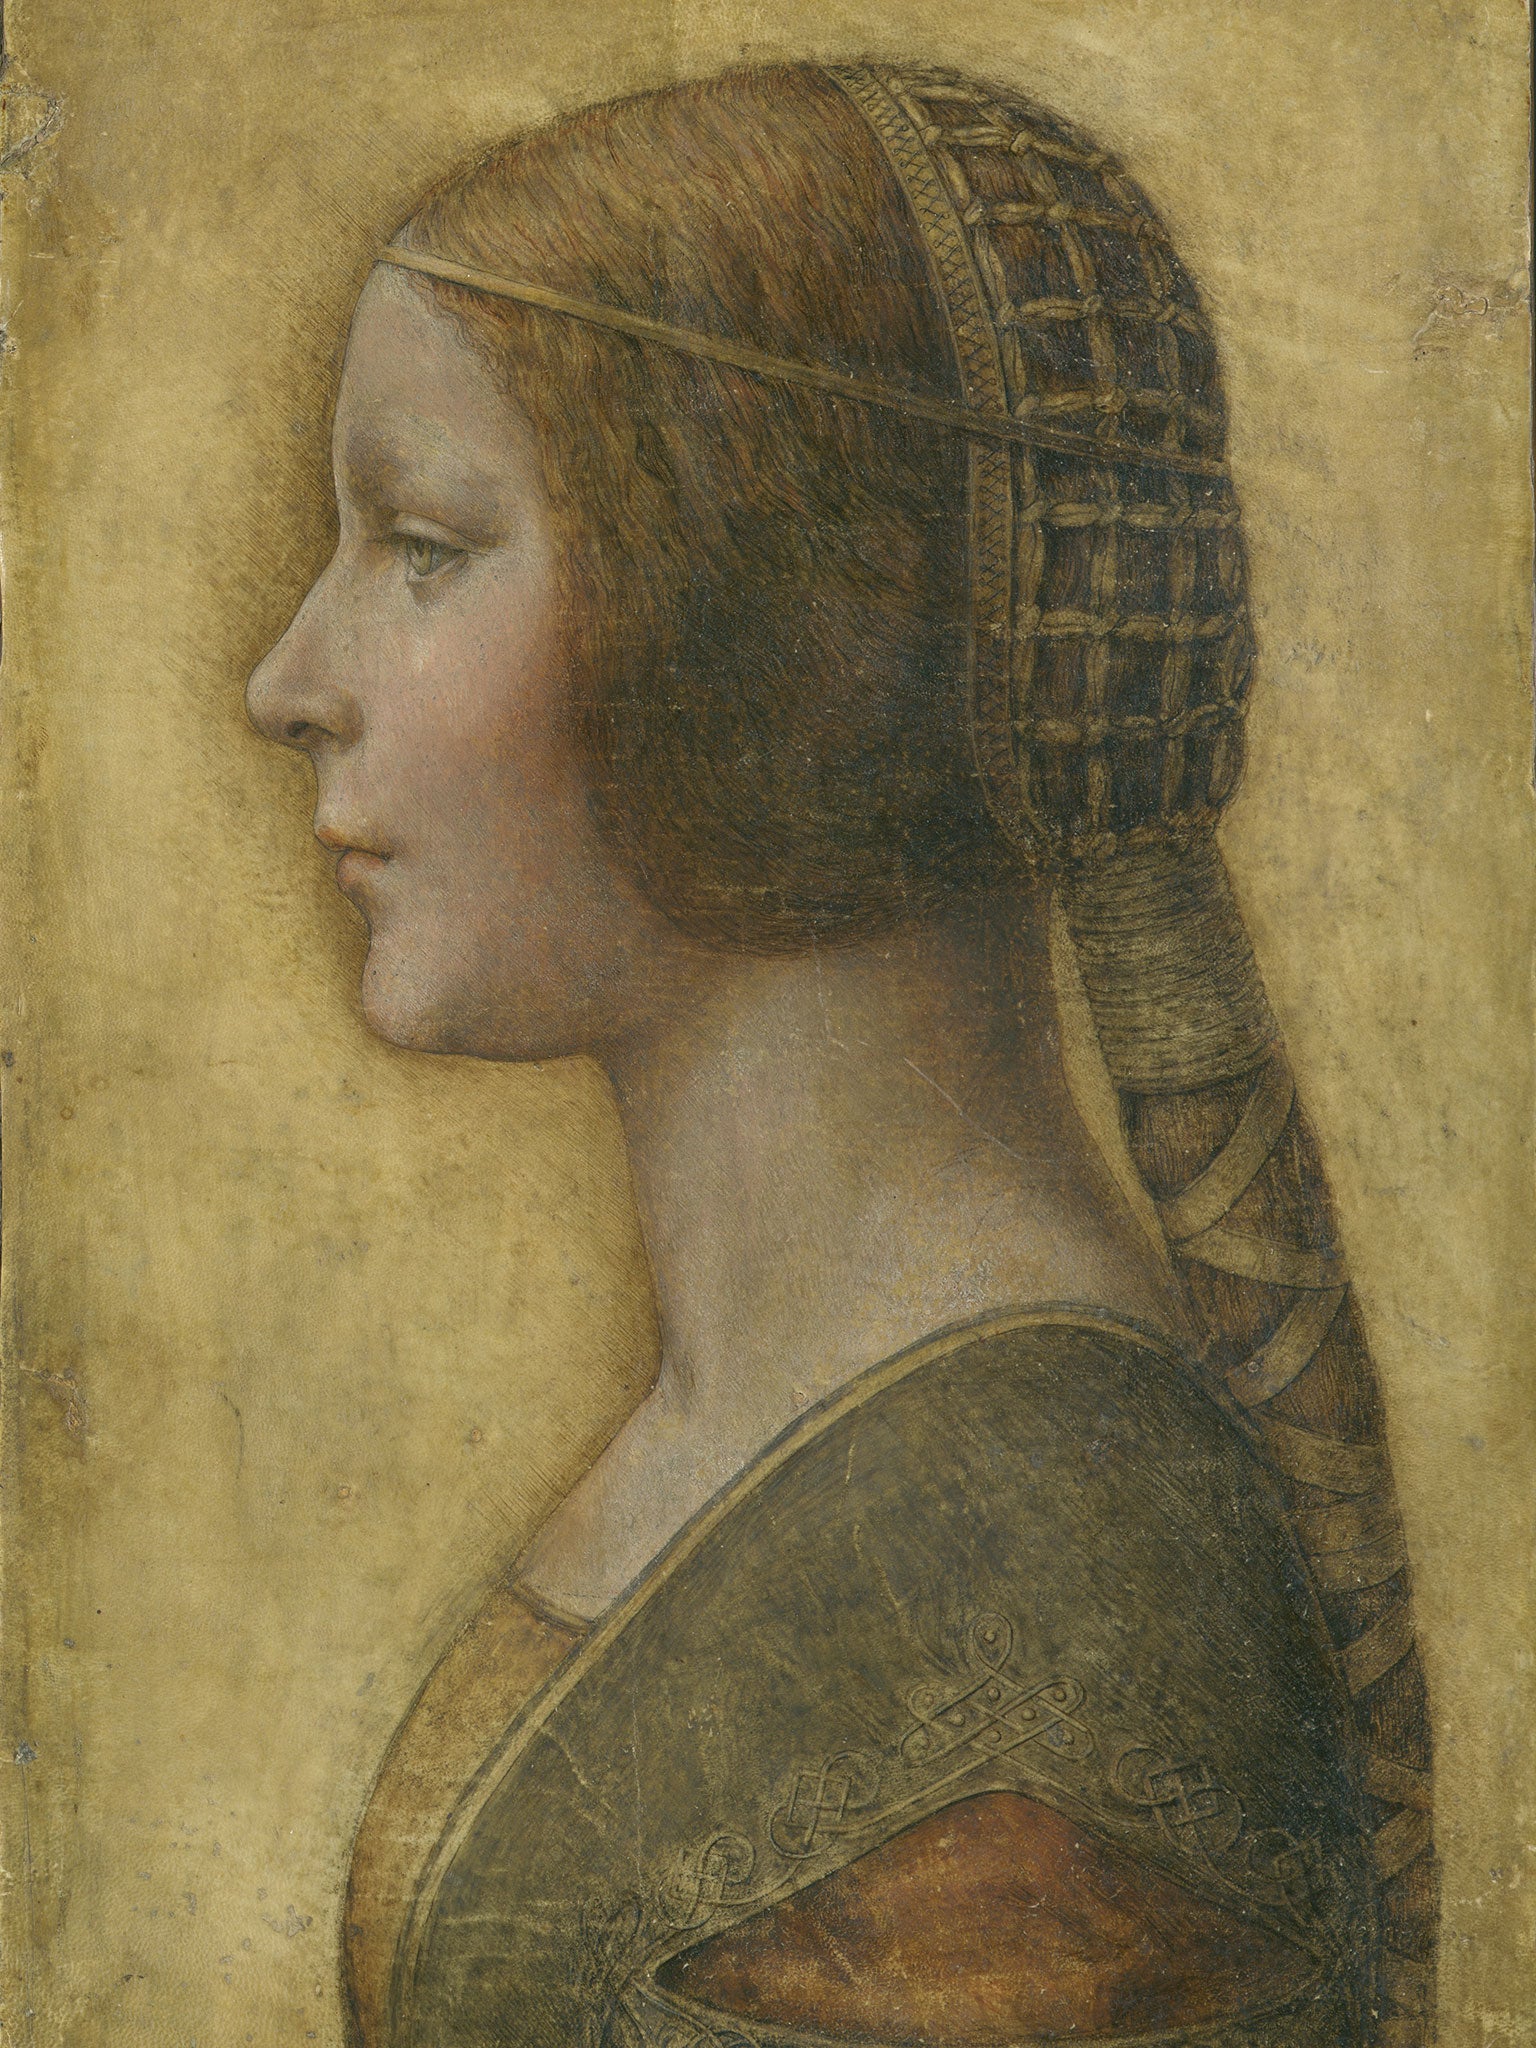 Renowned British forger Shaun Greenhalgh has claimed that he is the creator of La Bella Principessa, a £100m drawing attributed to Leonardo Da Vinci